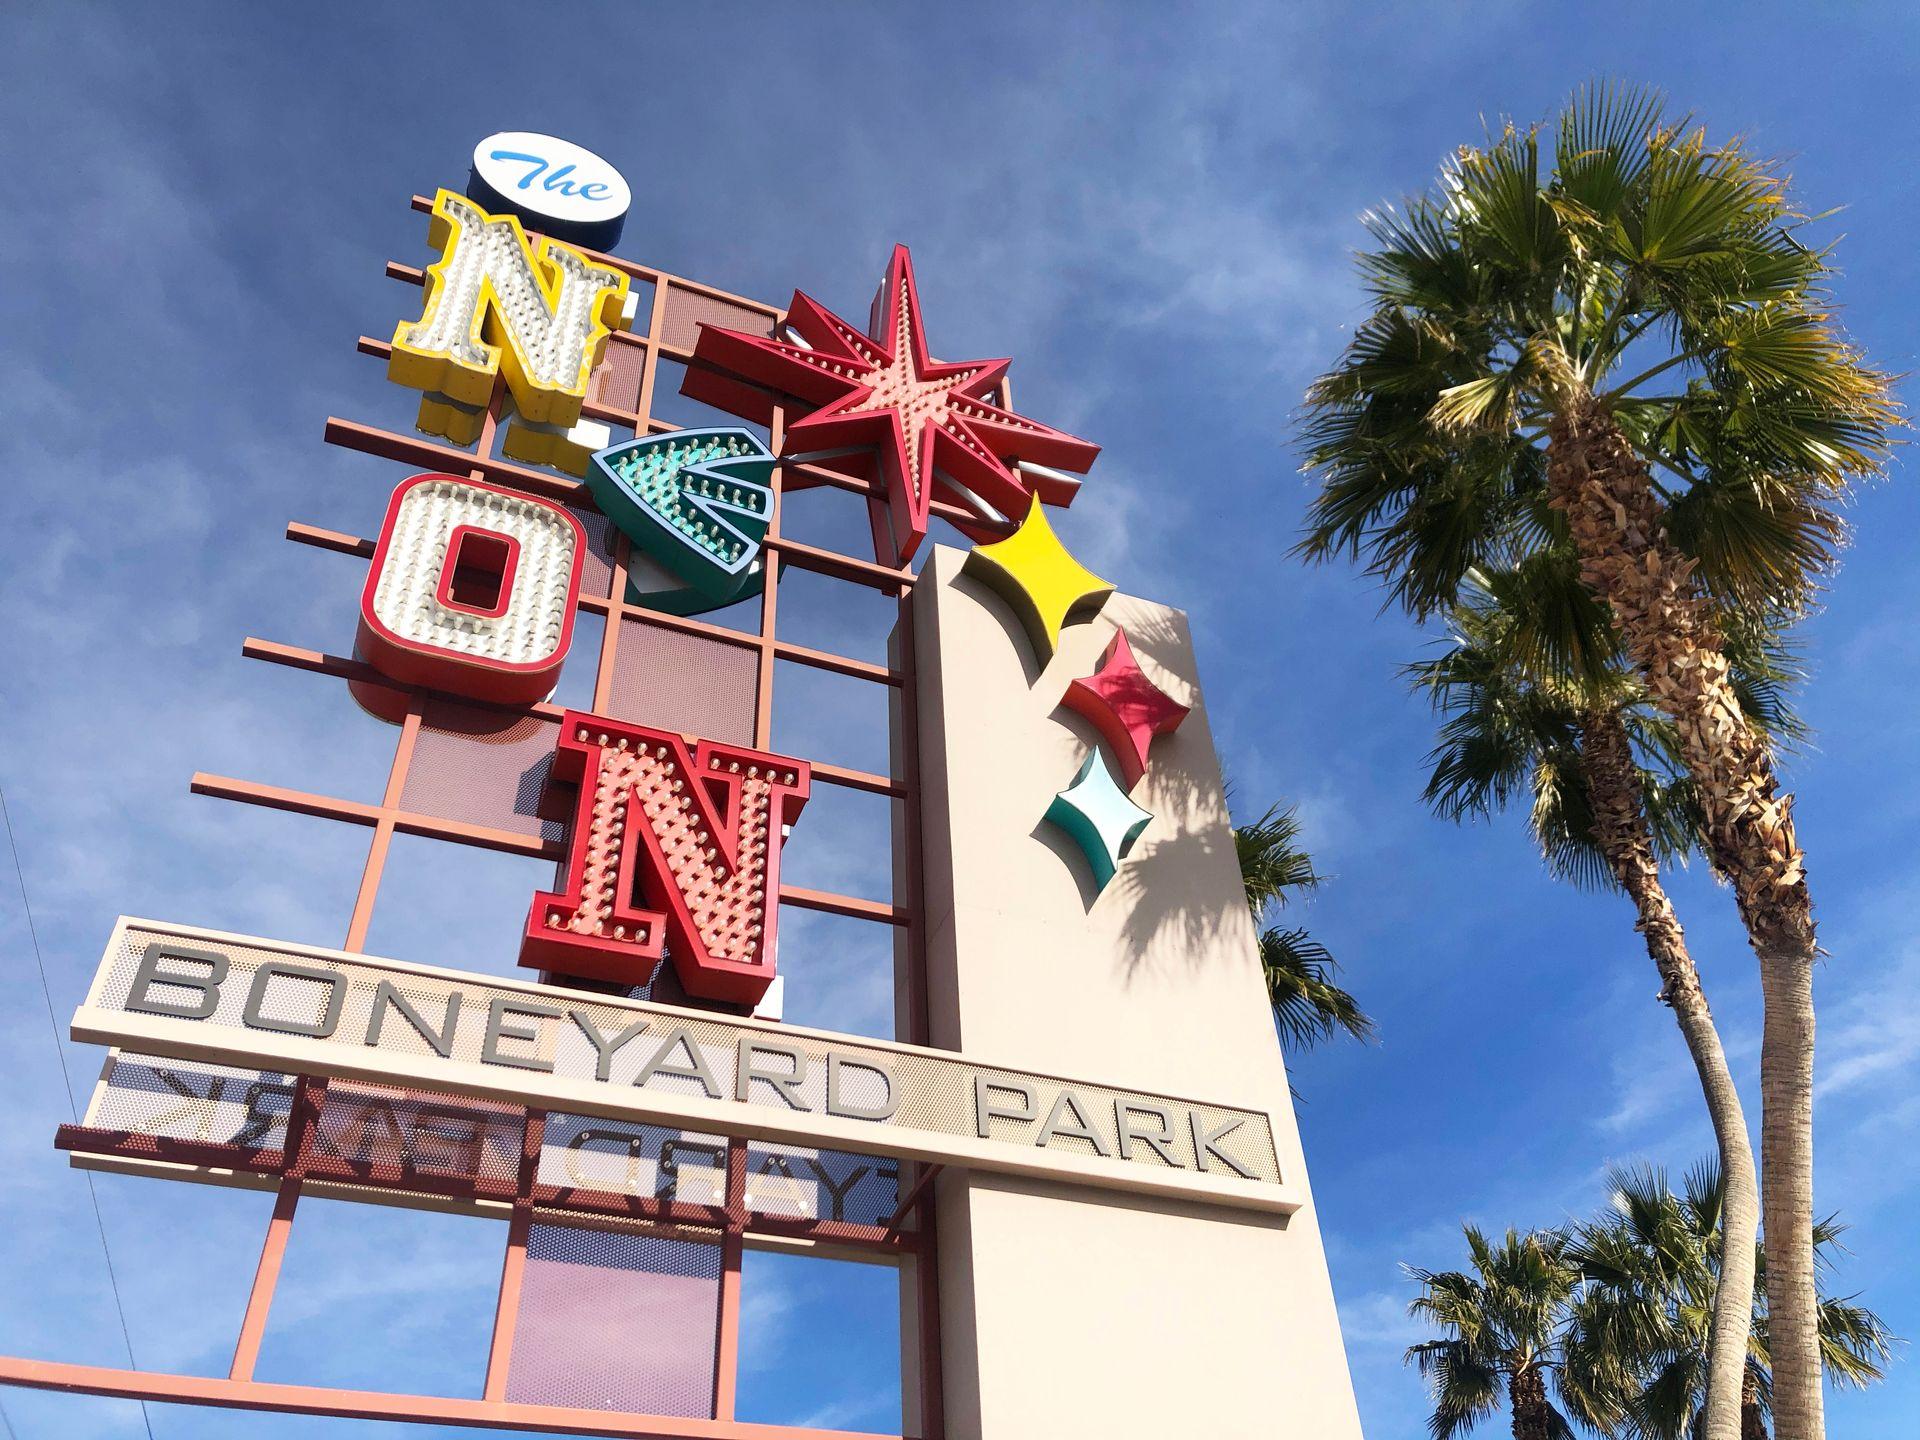 The sign for the Neon Museum next to a palm tree. It reads Neon Boneyard Park.